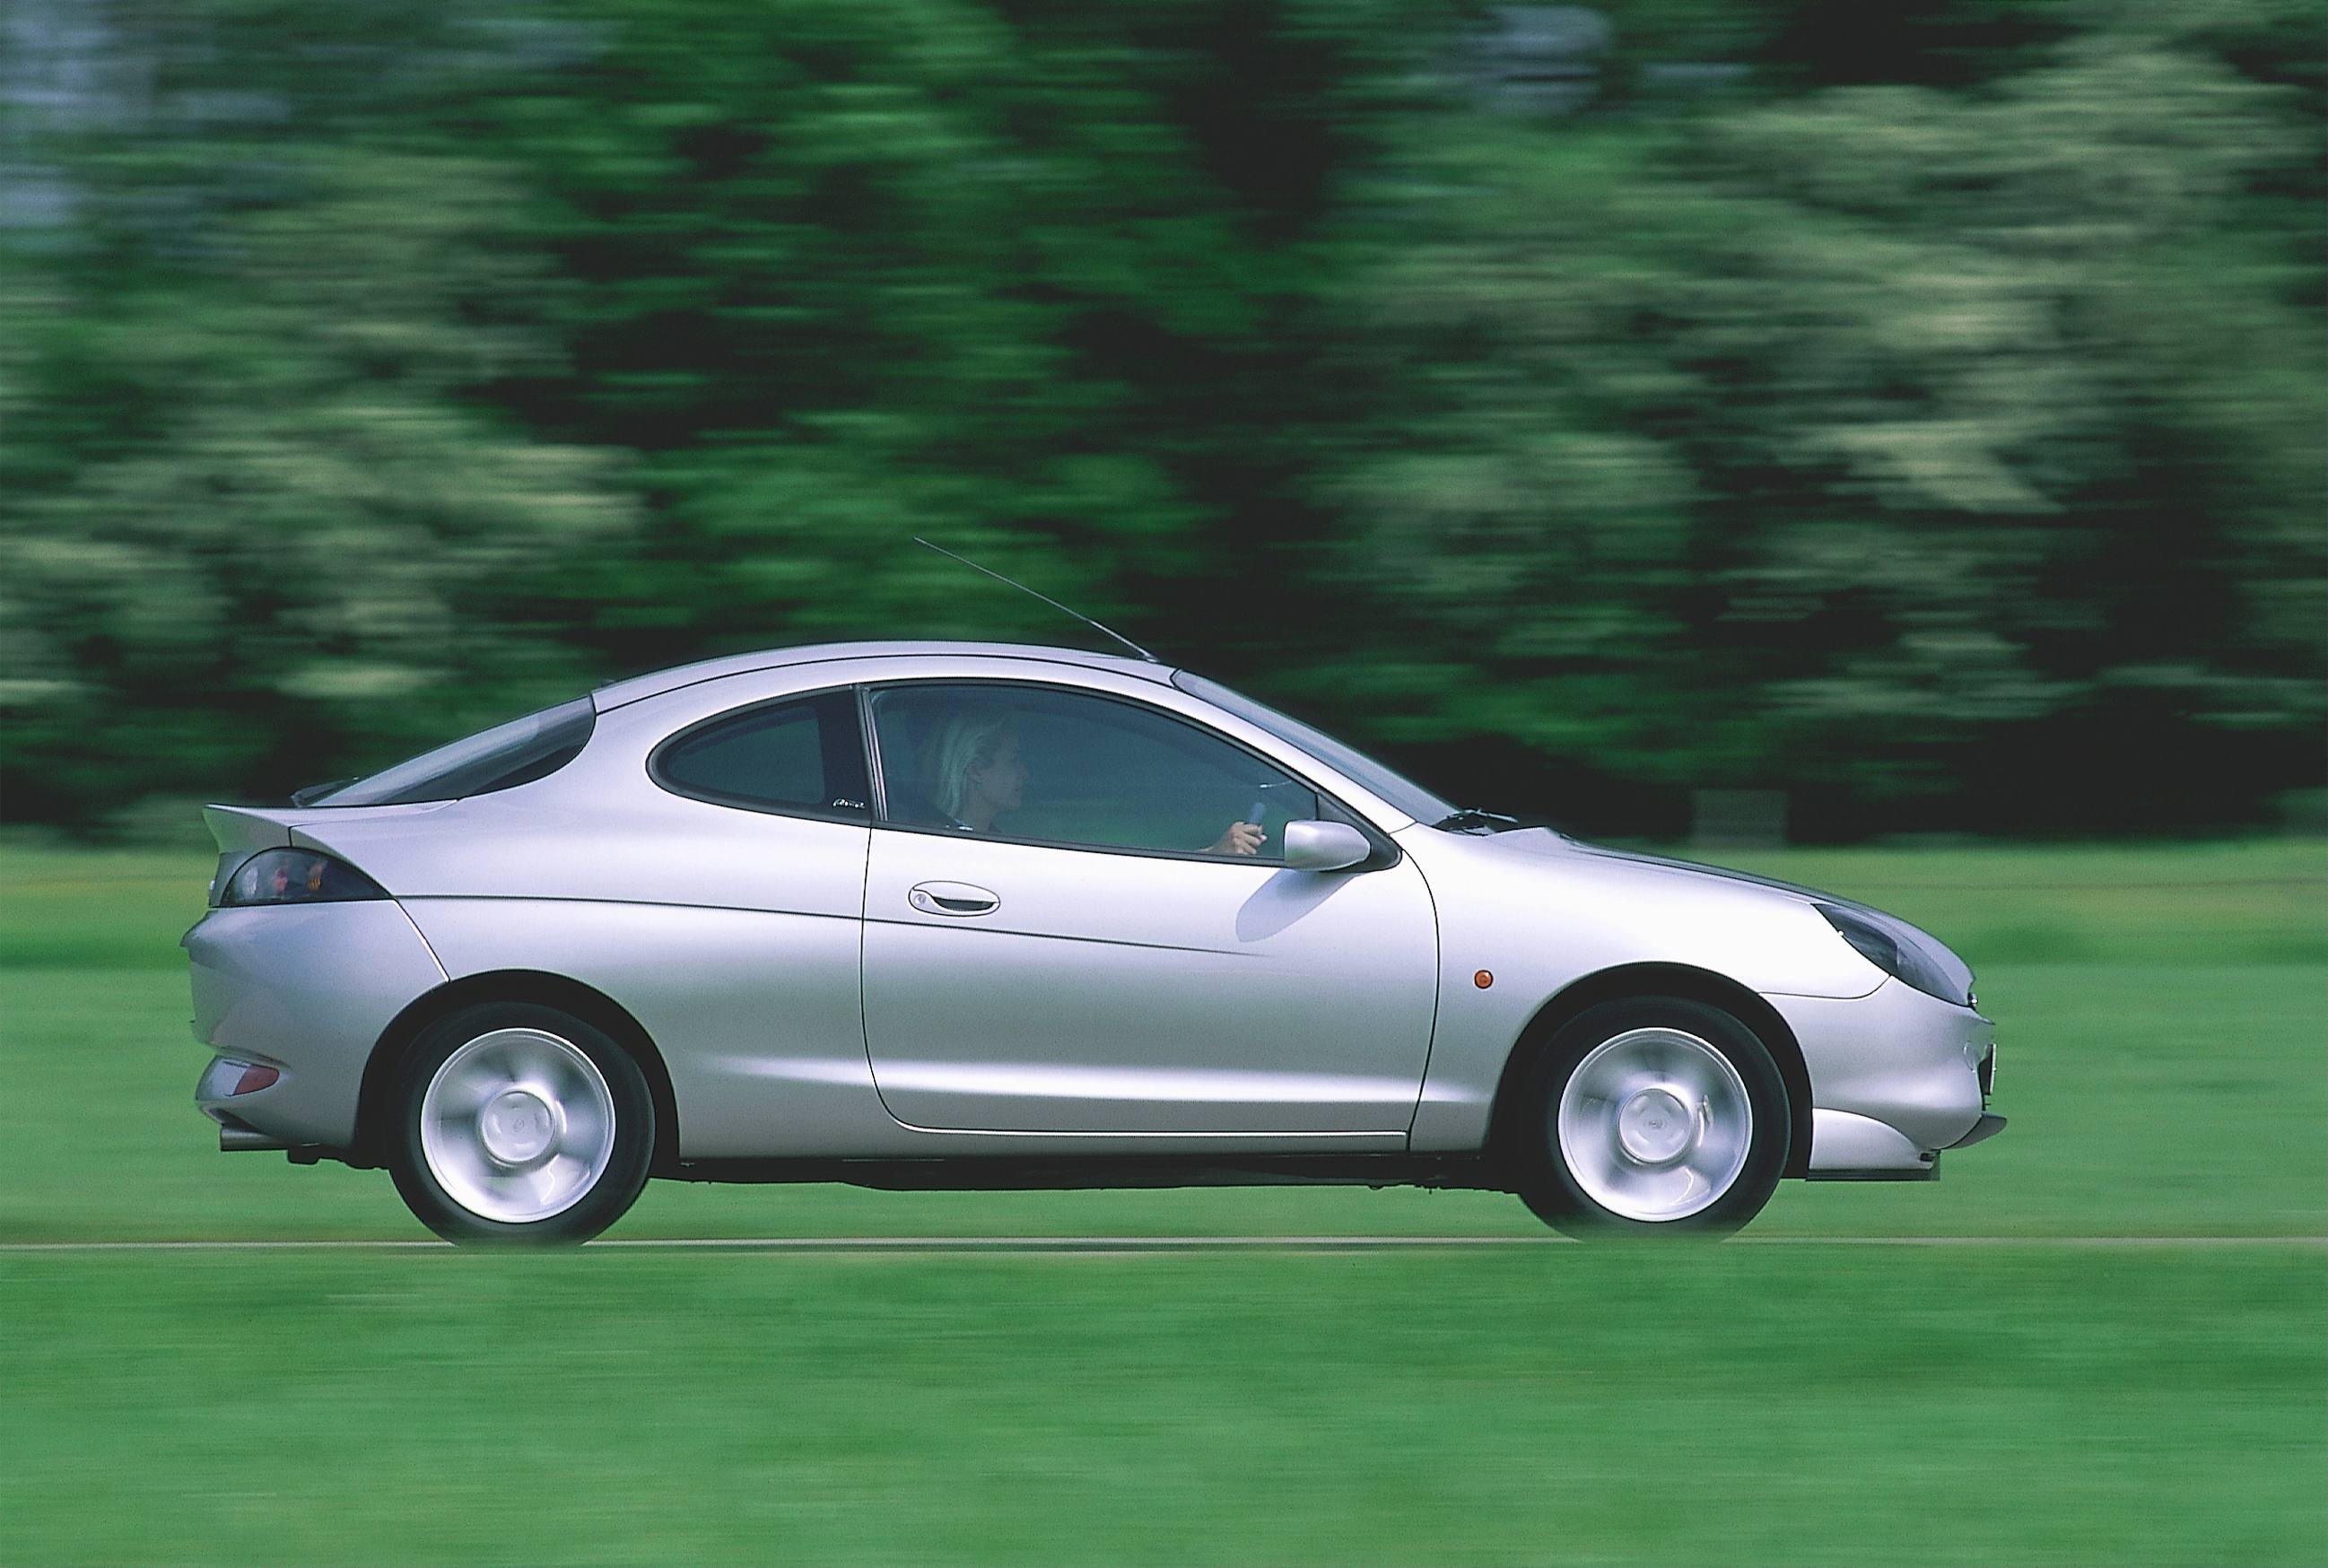 The Ford Puma is a 1990s classic, not a 